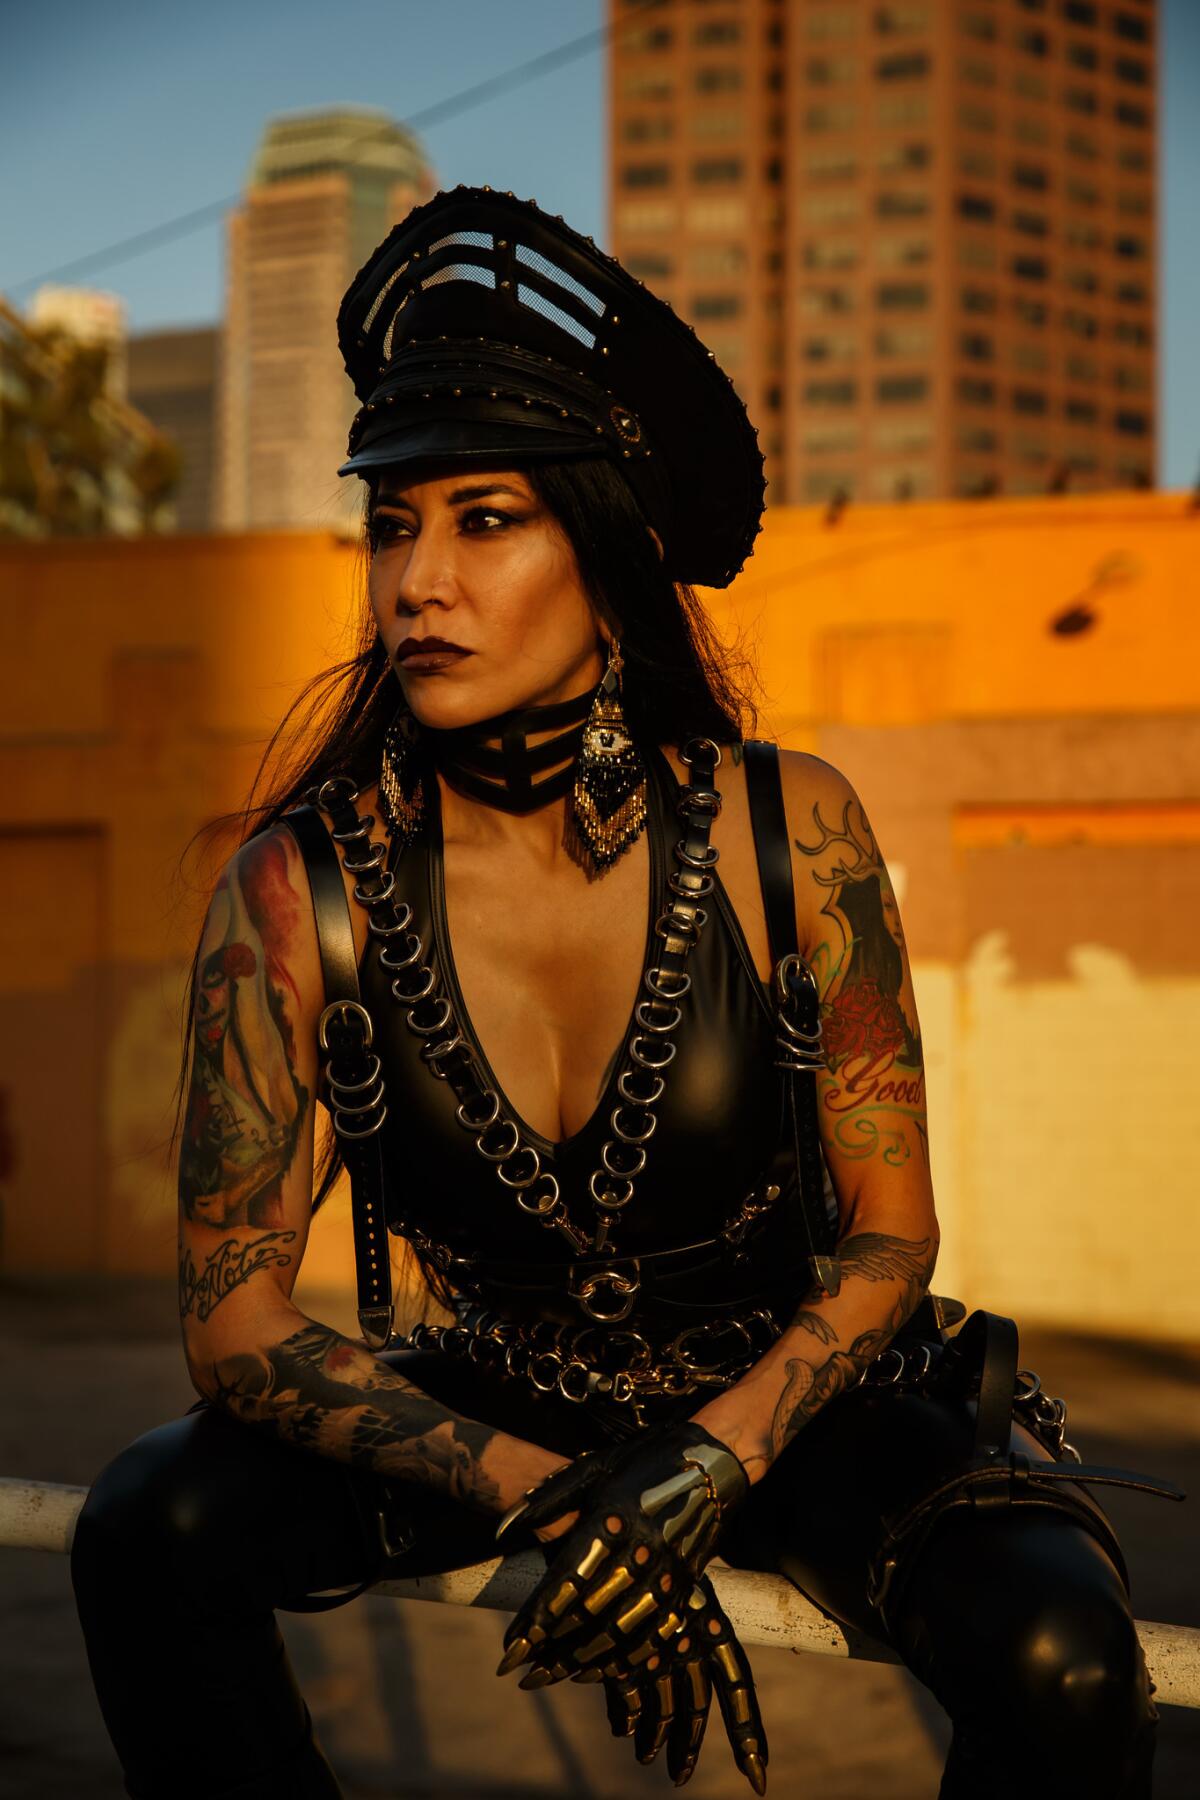 Artist Lizz Lopez poses for a portrait before her solo exhibition "Muerte" at Lethal Amounts in Los Angeles.